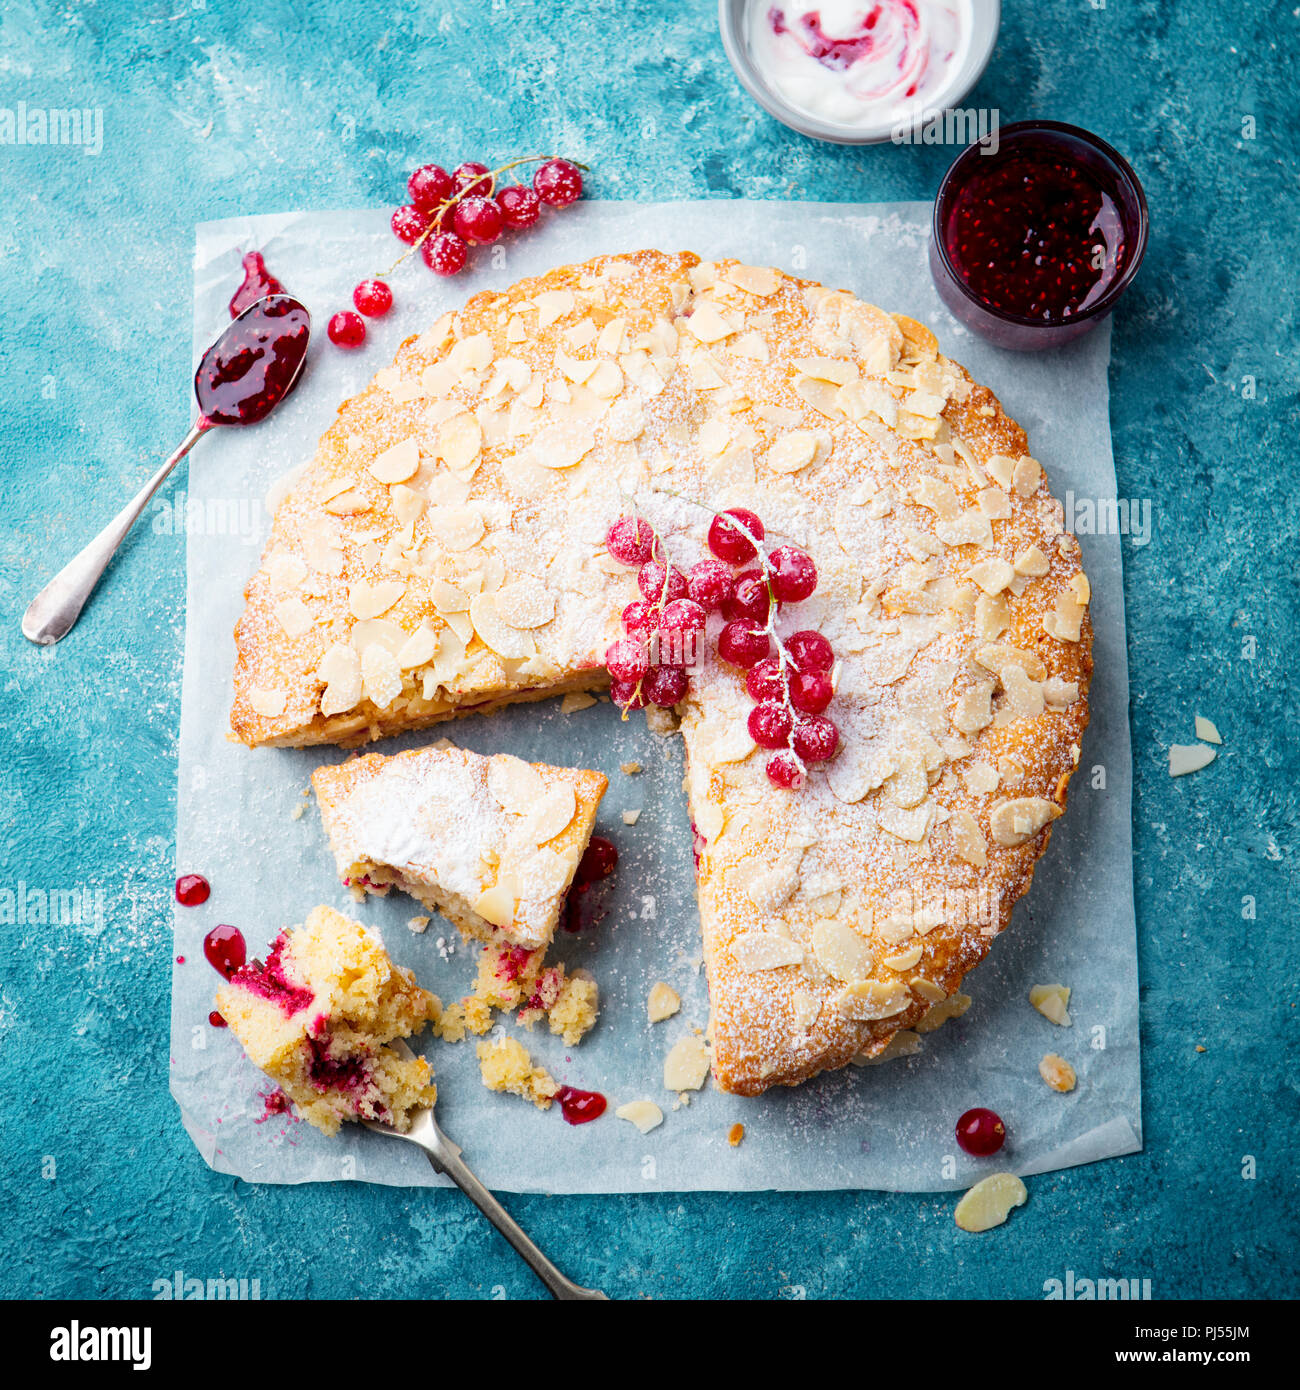 Almond and raspberry cake, Bakewell tart. Traditional British pastry. Blue background. Top view. Stock Photo